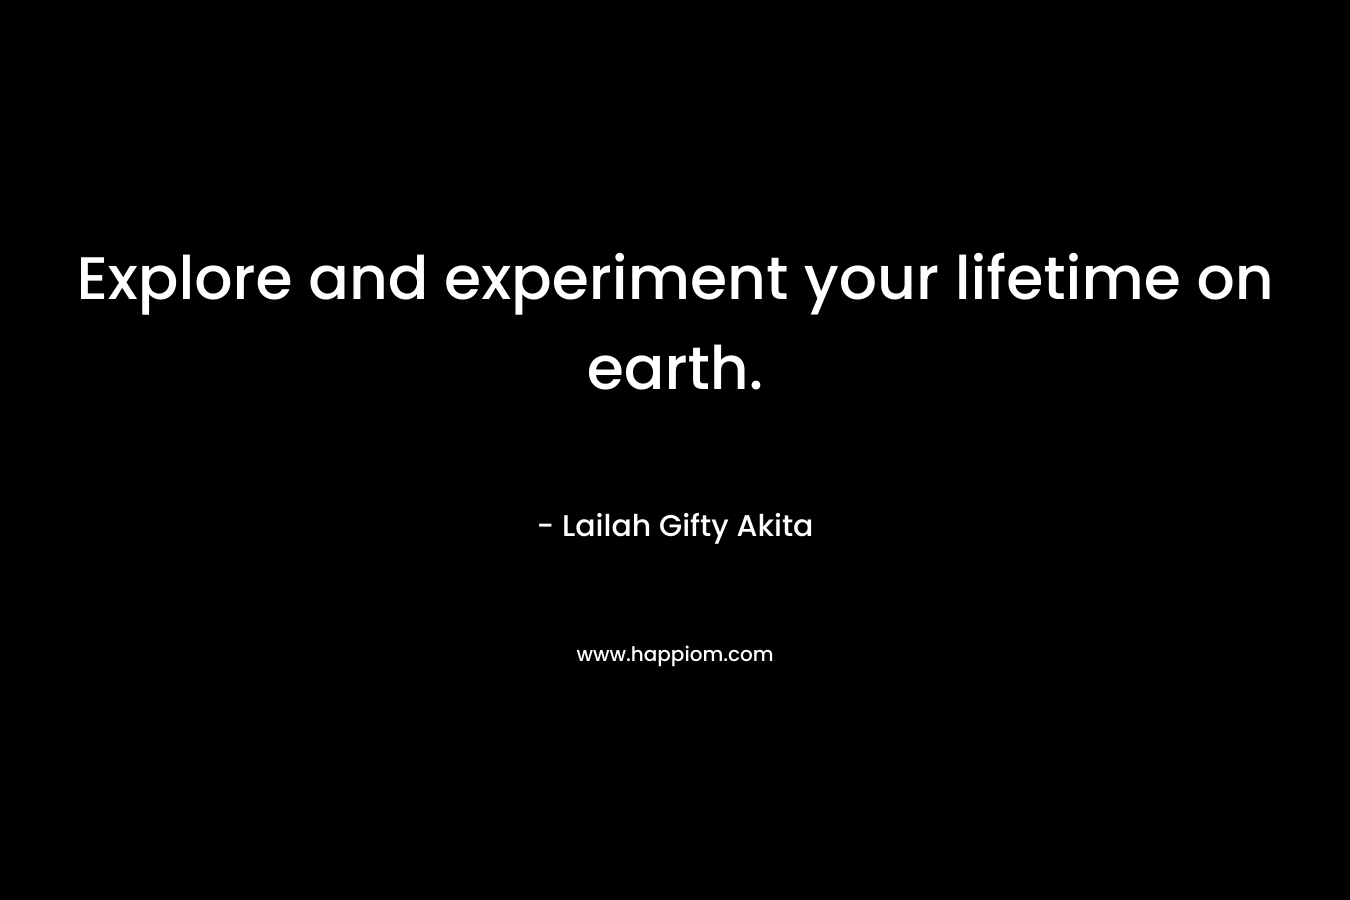 Explore and experiment your lifetime on earth.